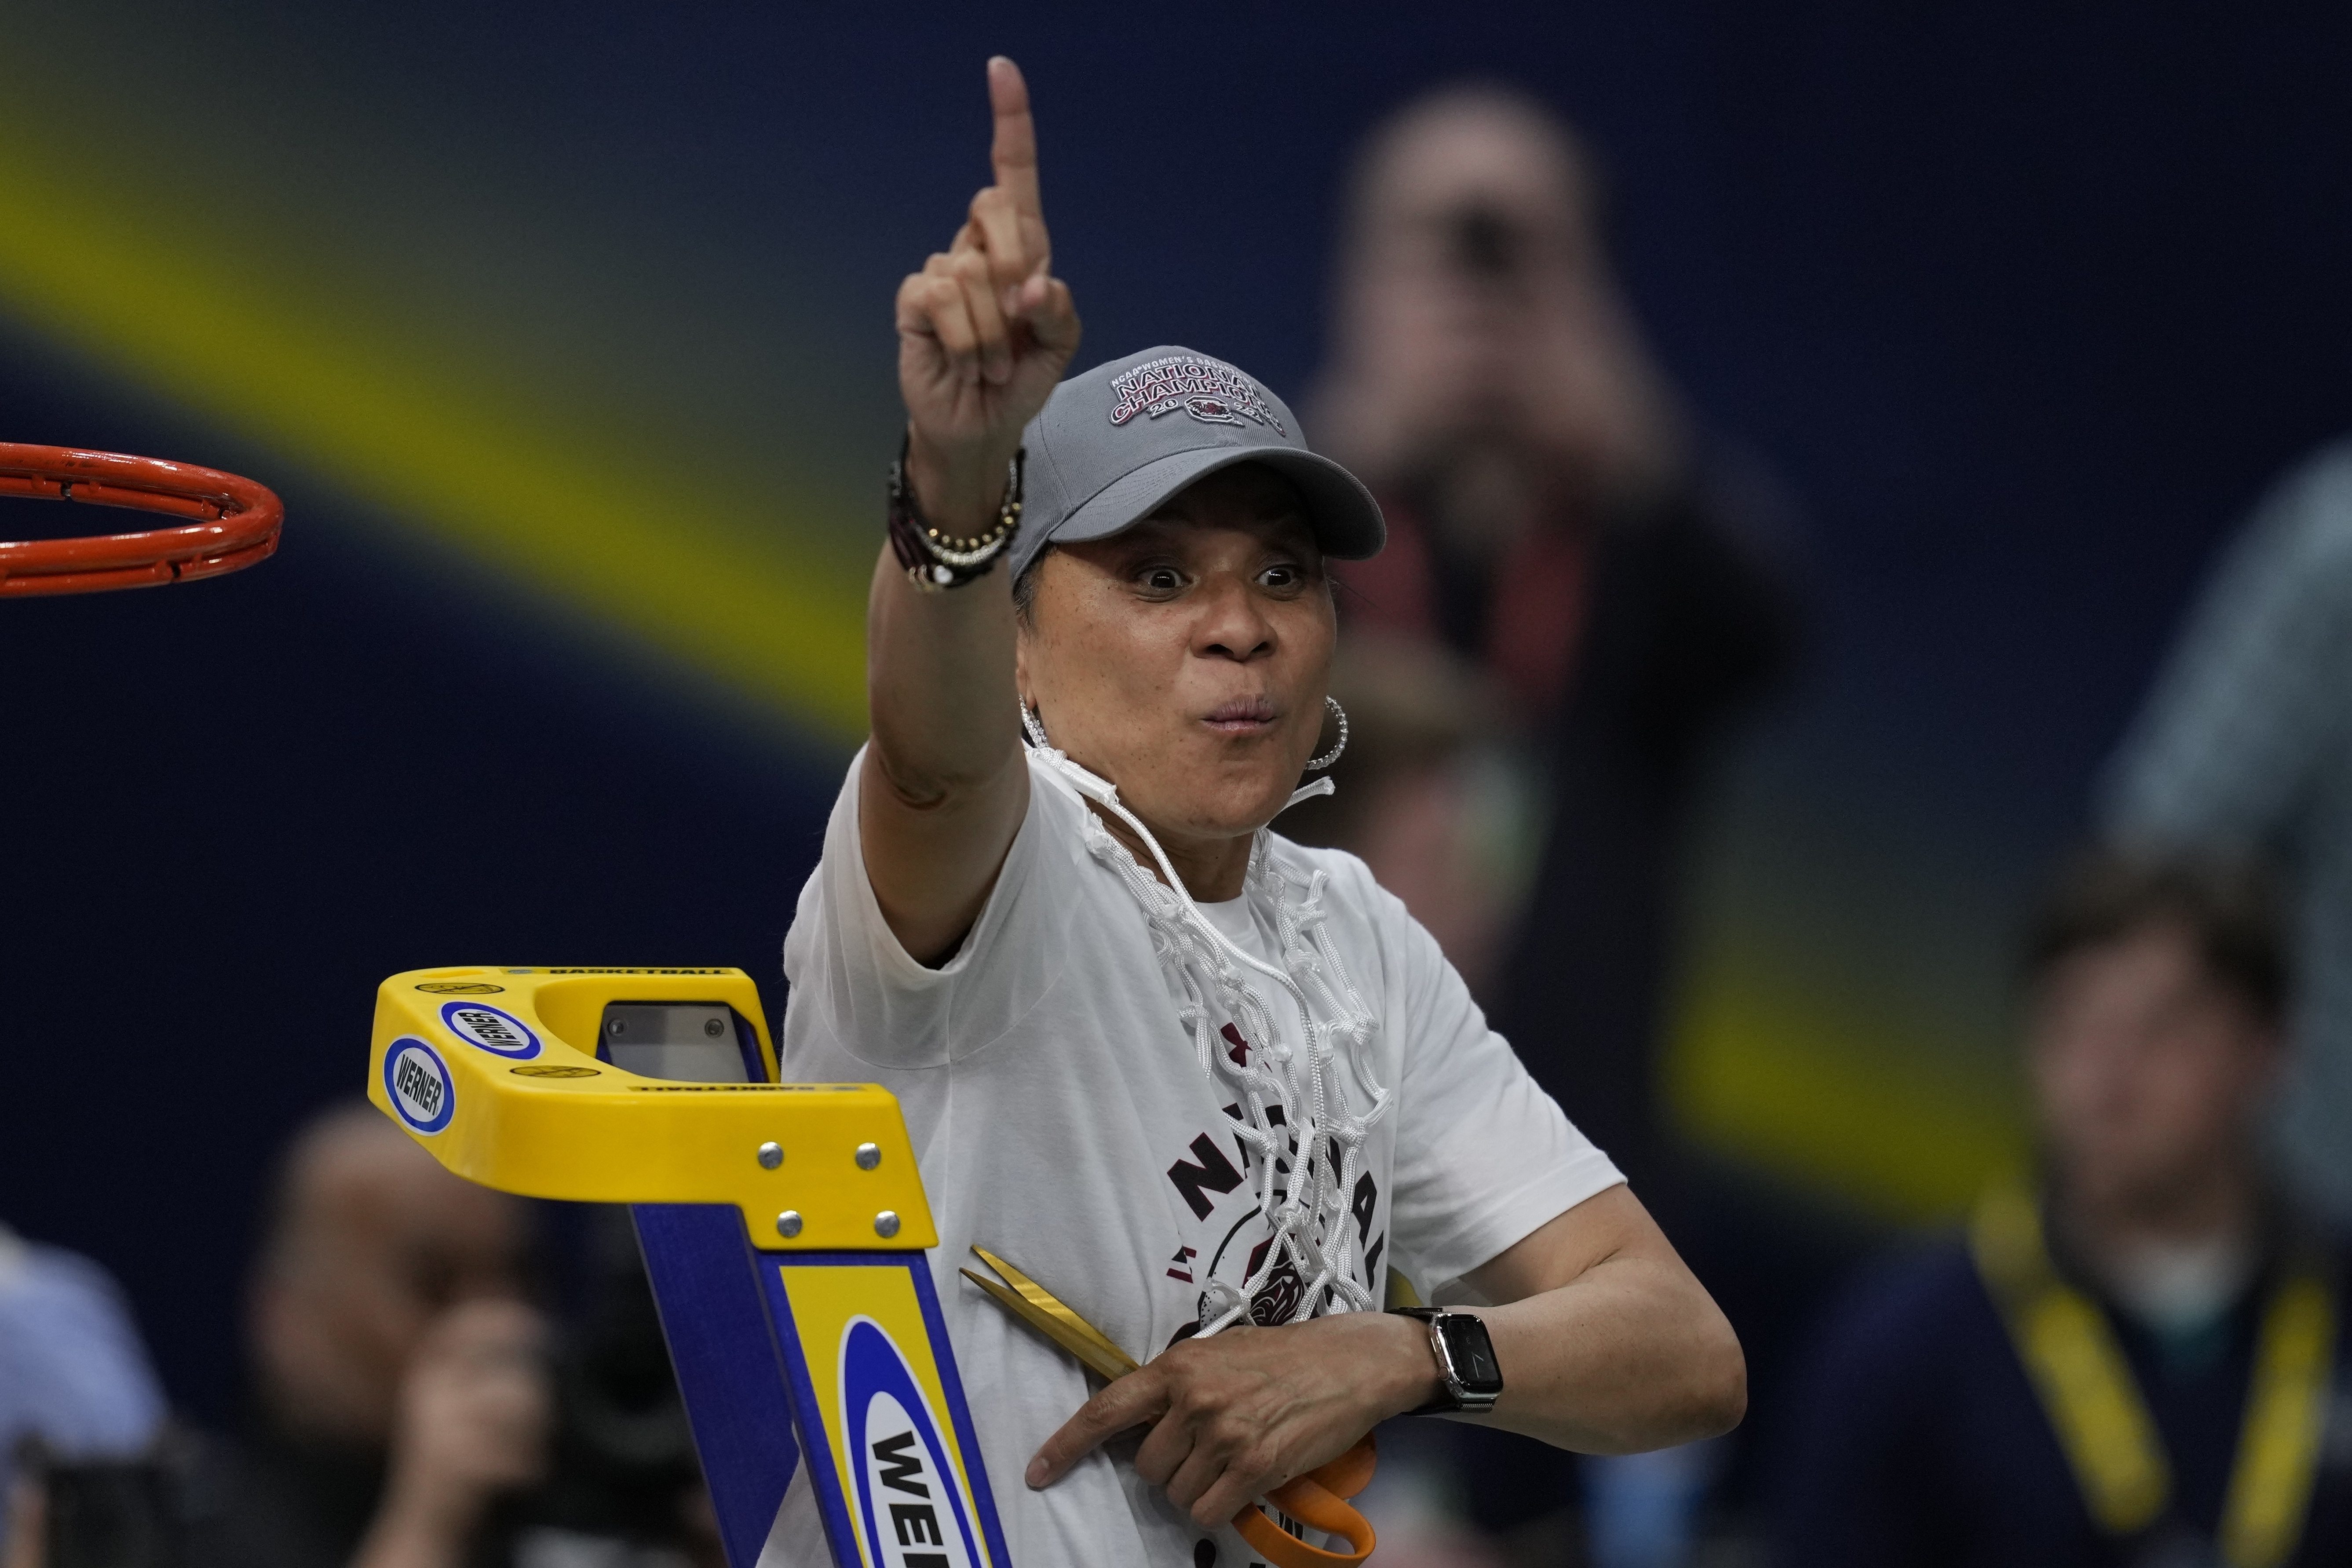 Dawn Staley calls out ESPN for not inviting best college player nominee  Aliyah Boston to ESPYs